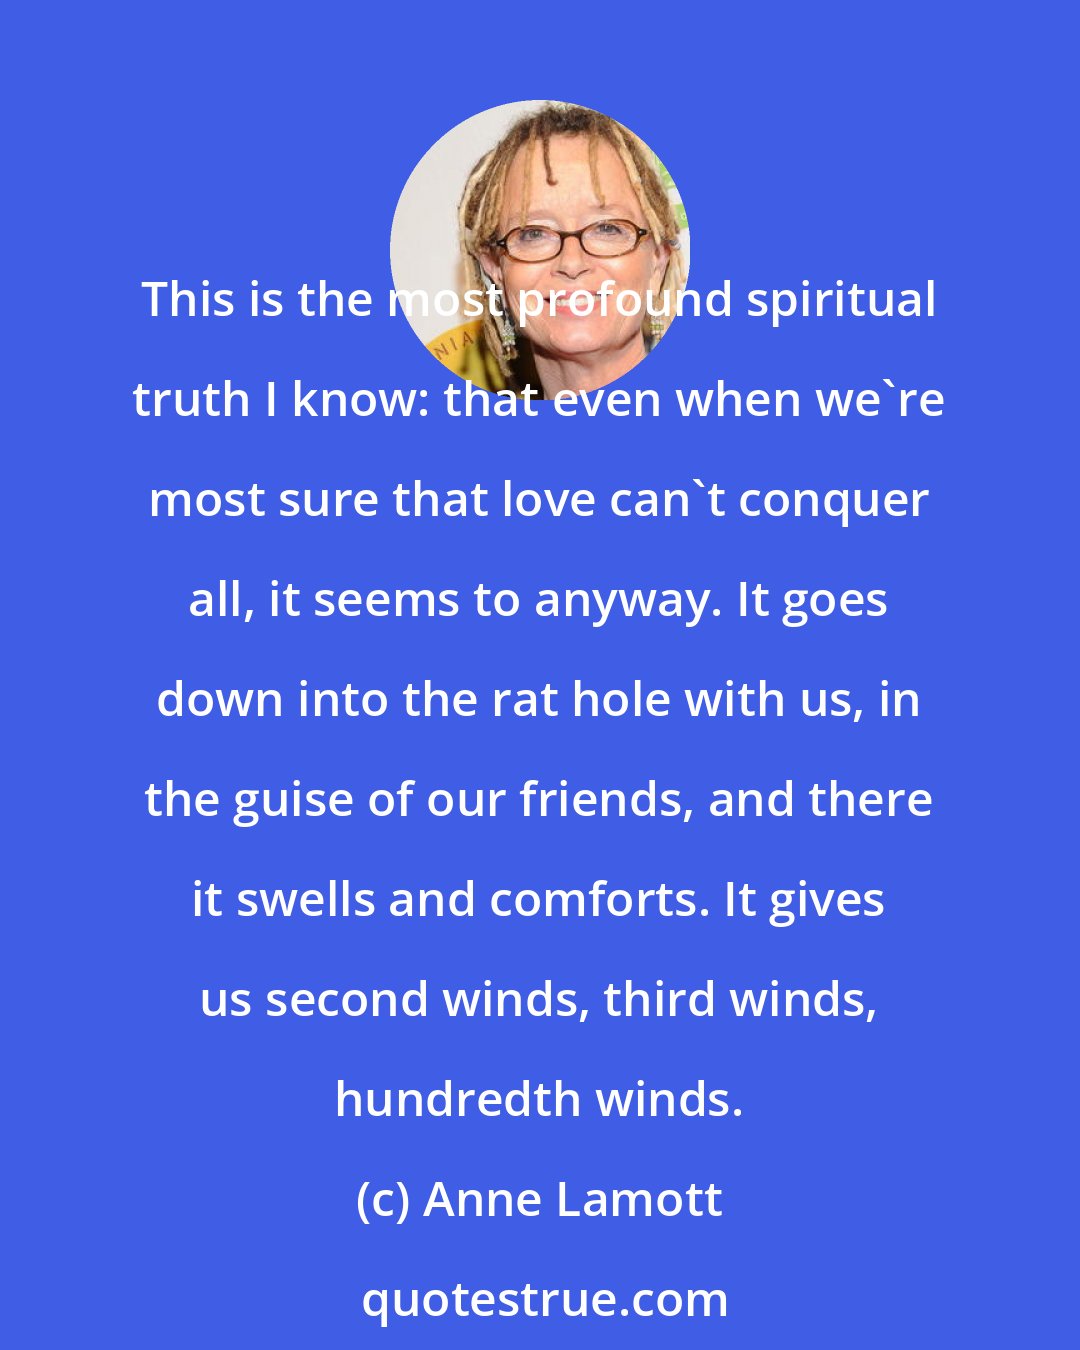 Anne Lamott: This is the most profound spiritual truth I know: that even when we're most sure that love can't conquer all, it seems to anyway. It goes down into the rat hole with us, in the guise of our friends, and there it swells and comforts. It gives us second winds, third winds, hundredth winds.